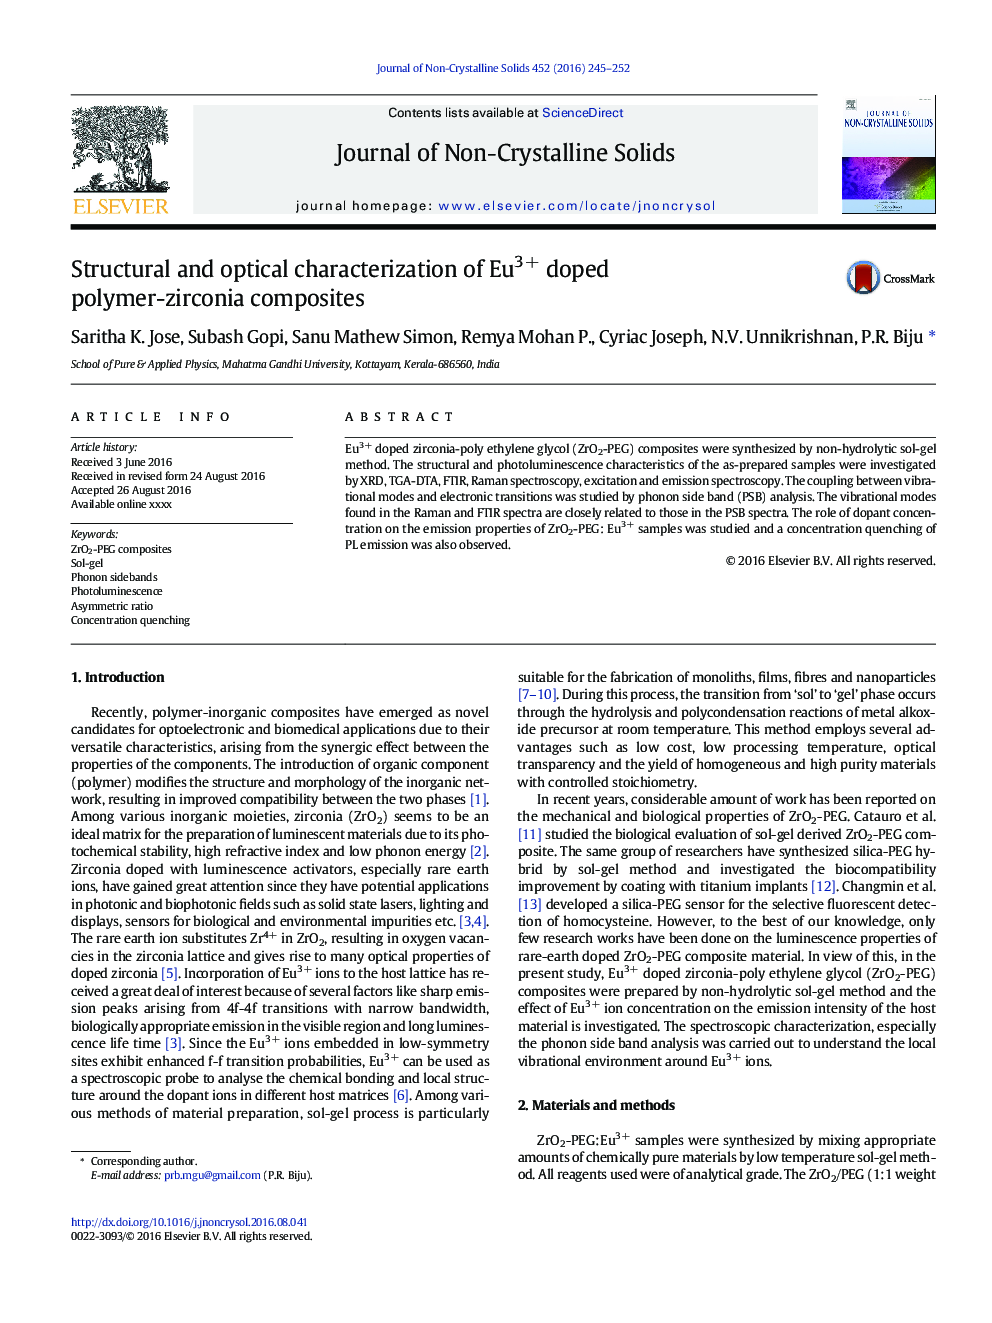 Structural and optical characterization of Eu3+ doped polymer-zirconia composites